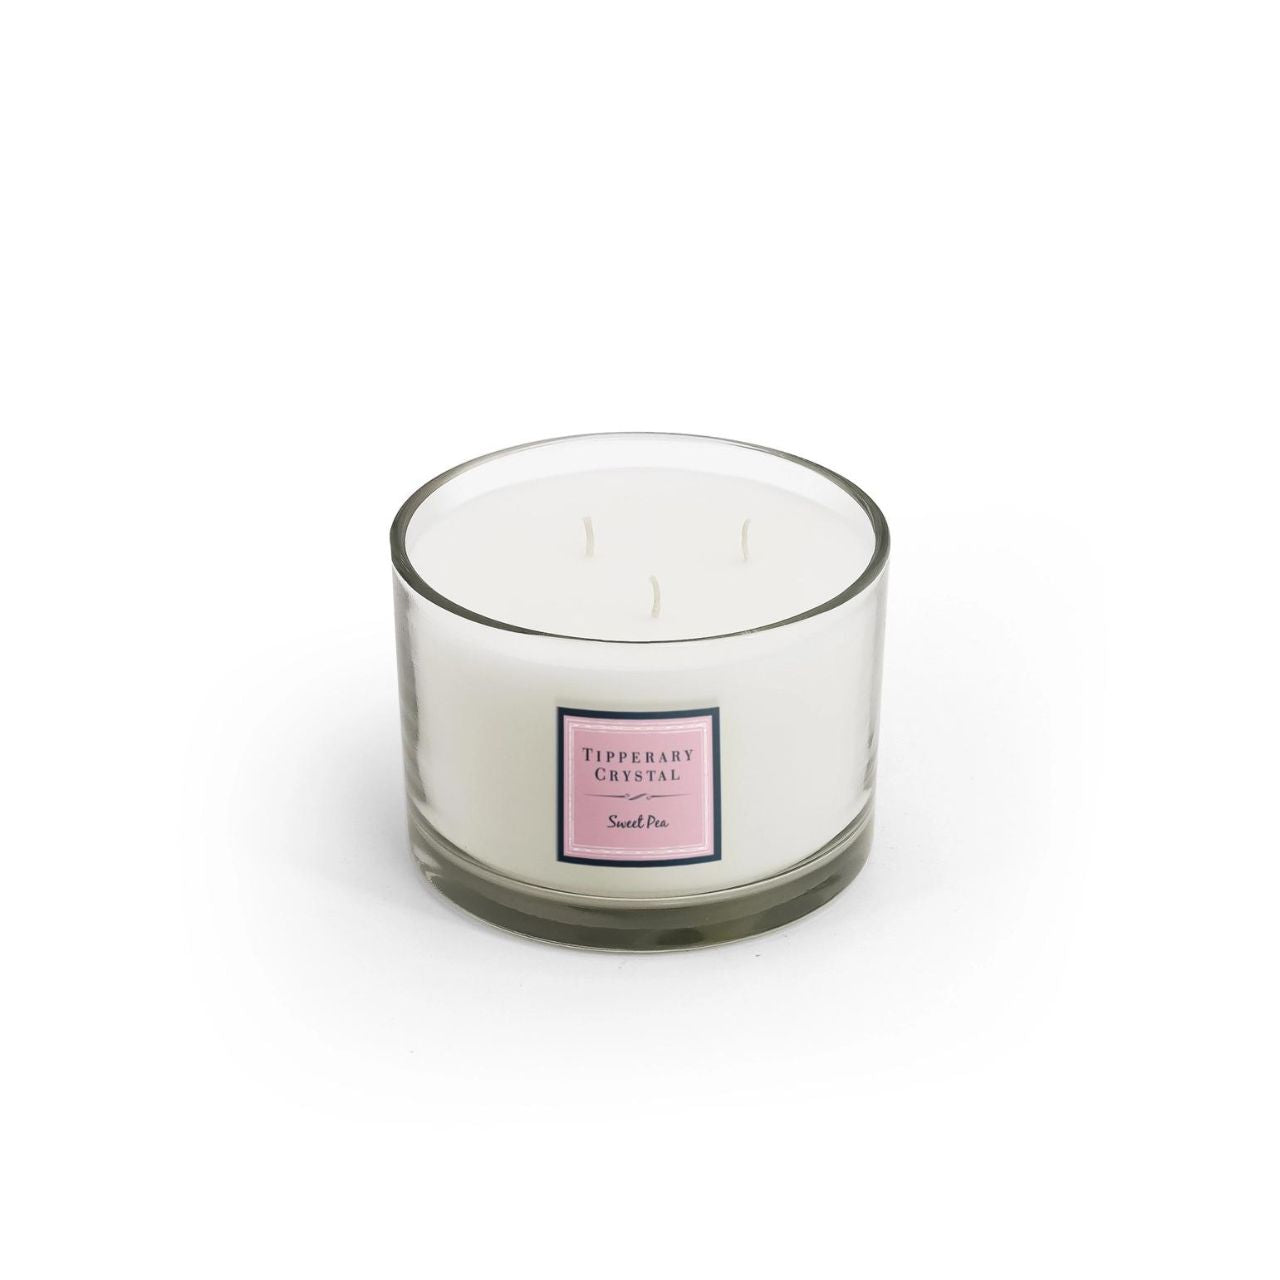 Tipperary Crystal Jardin Collection 3 Wick Candle - Sweet Pea  This is a beautifully designed Sweet Pea fragranced candle. Indulge yourself with the fresh ﬂoral fragrance of sweet pea with a base of precious woods.